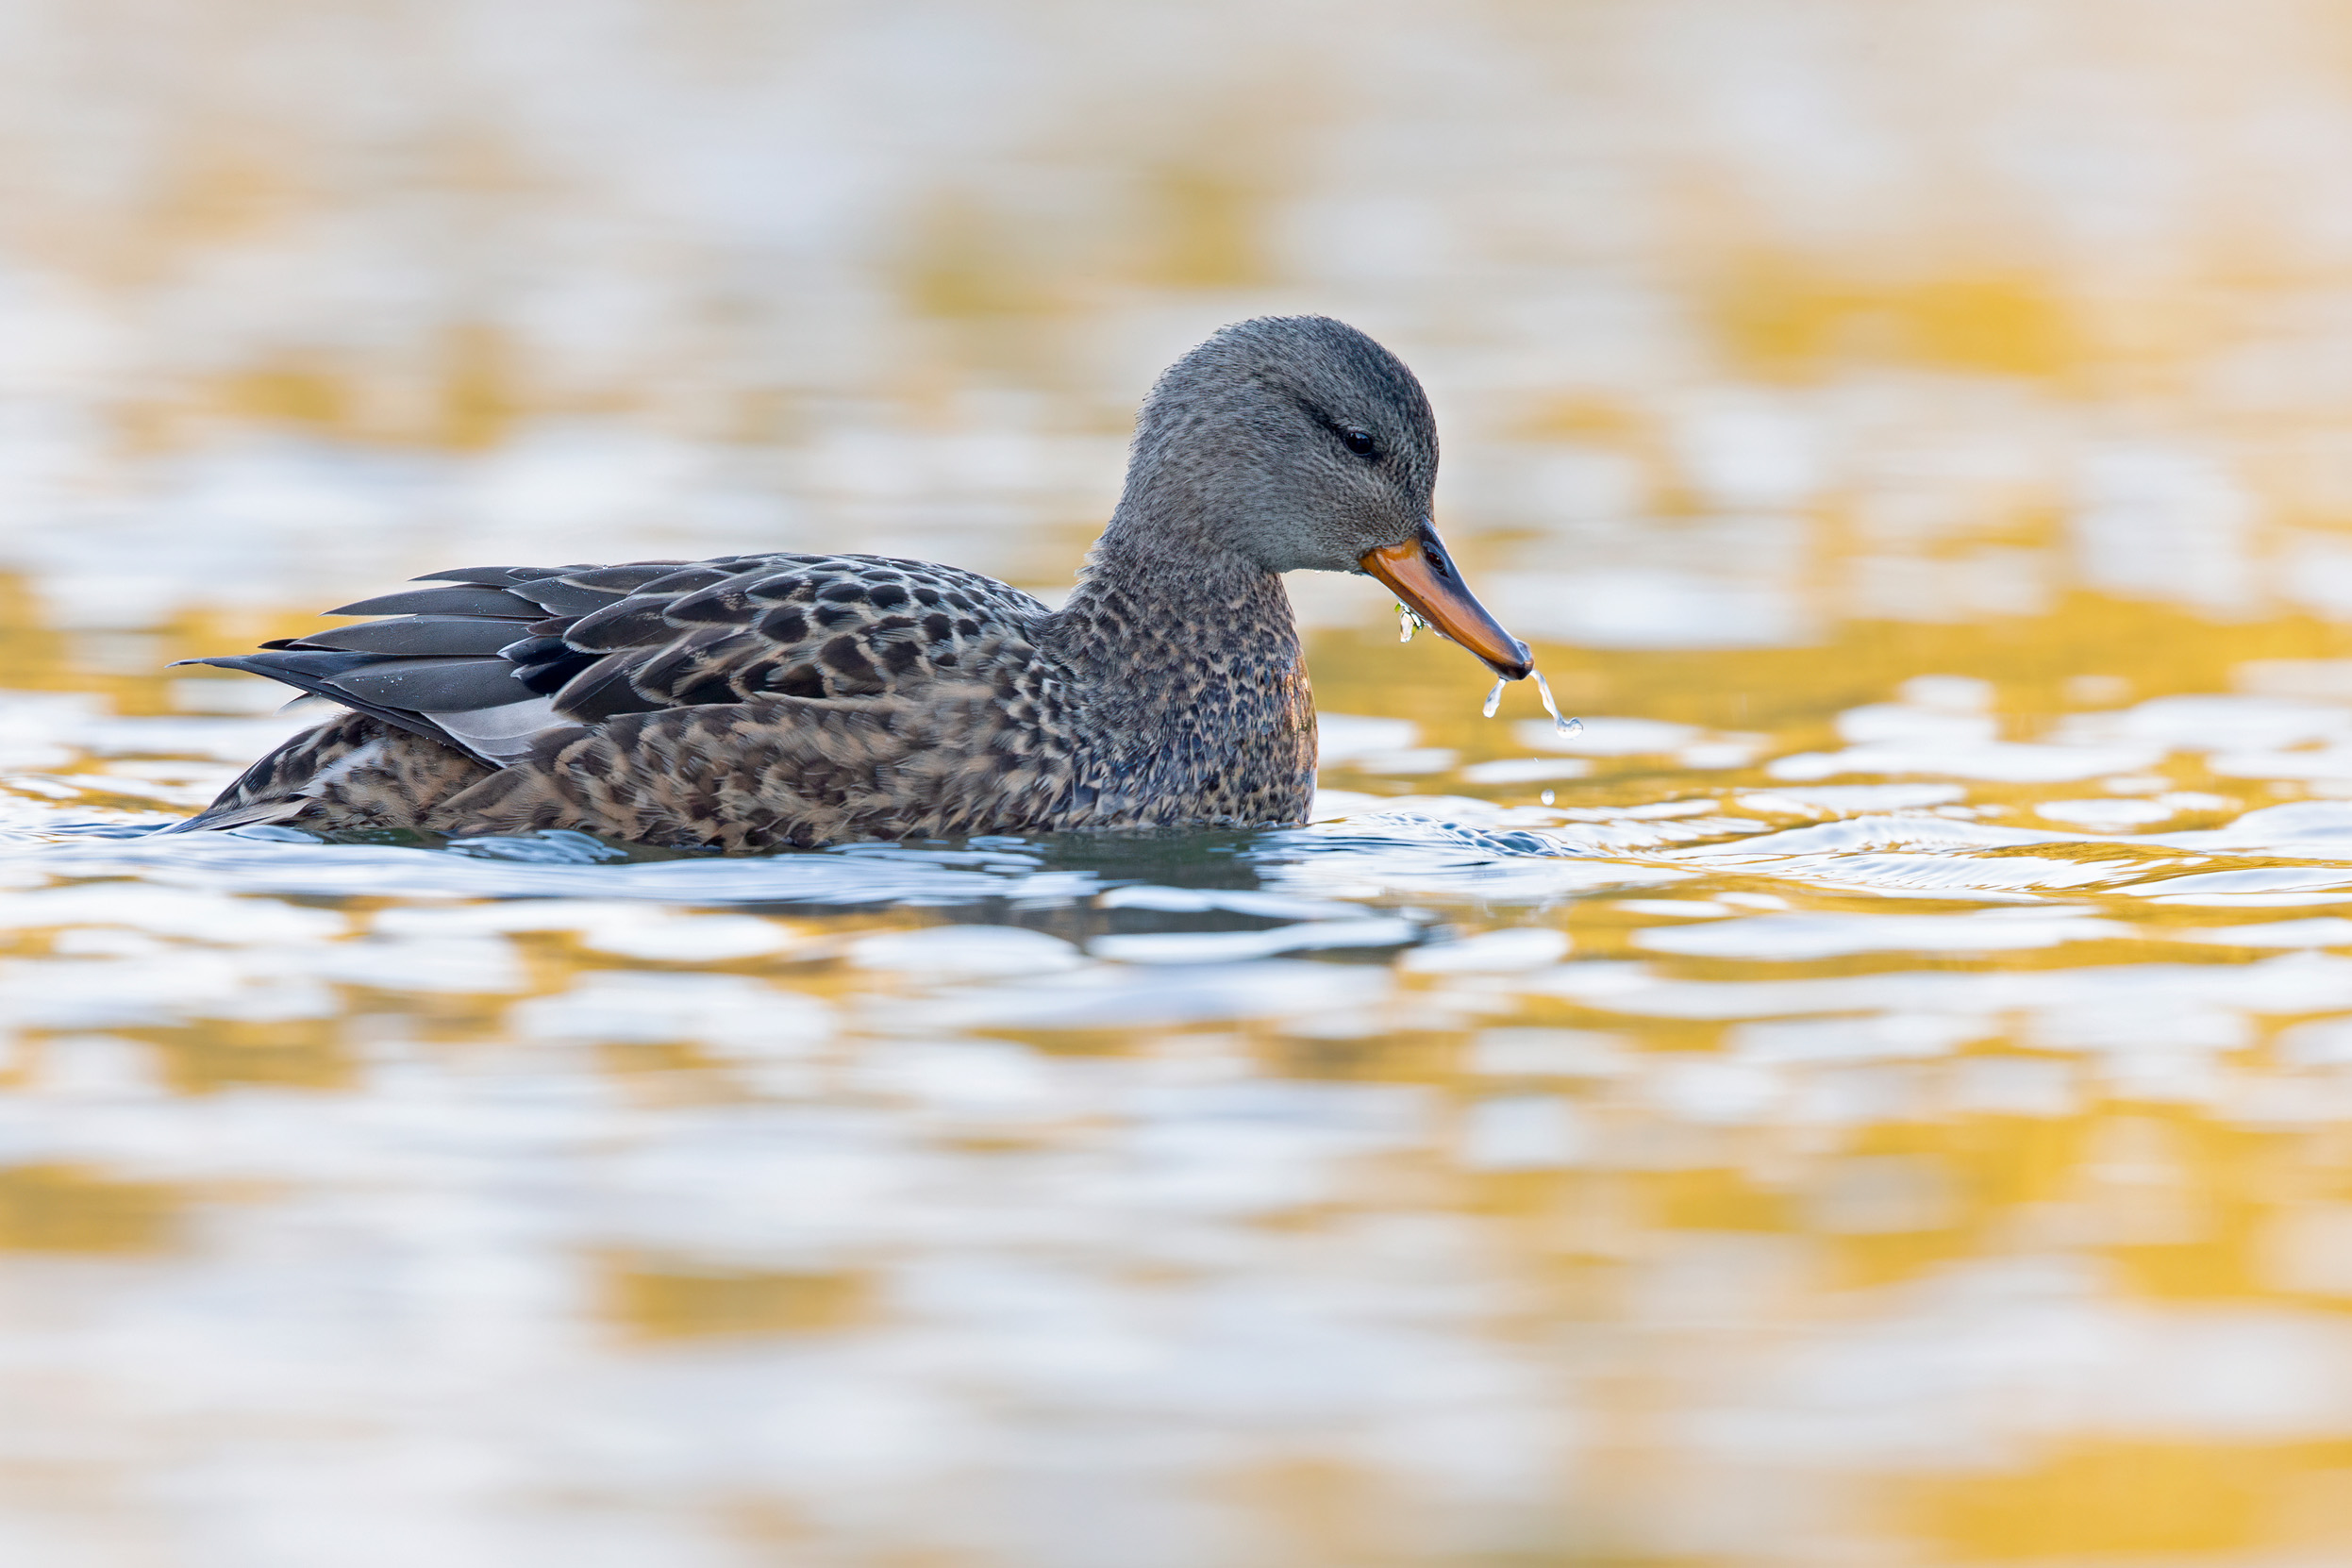 Female Gadwall floating on rippled water, reflecting a golden colour from above